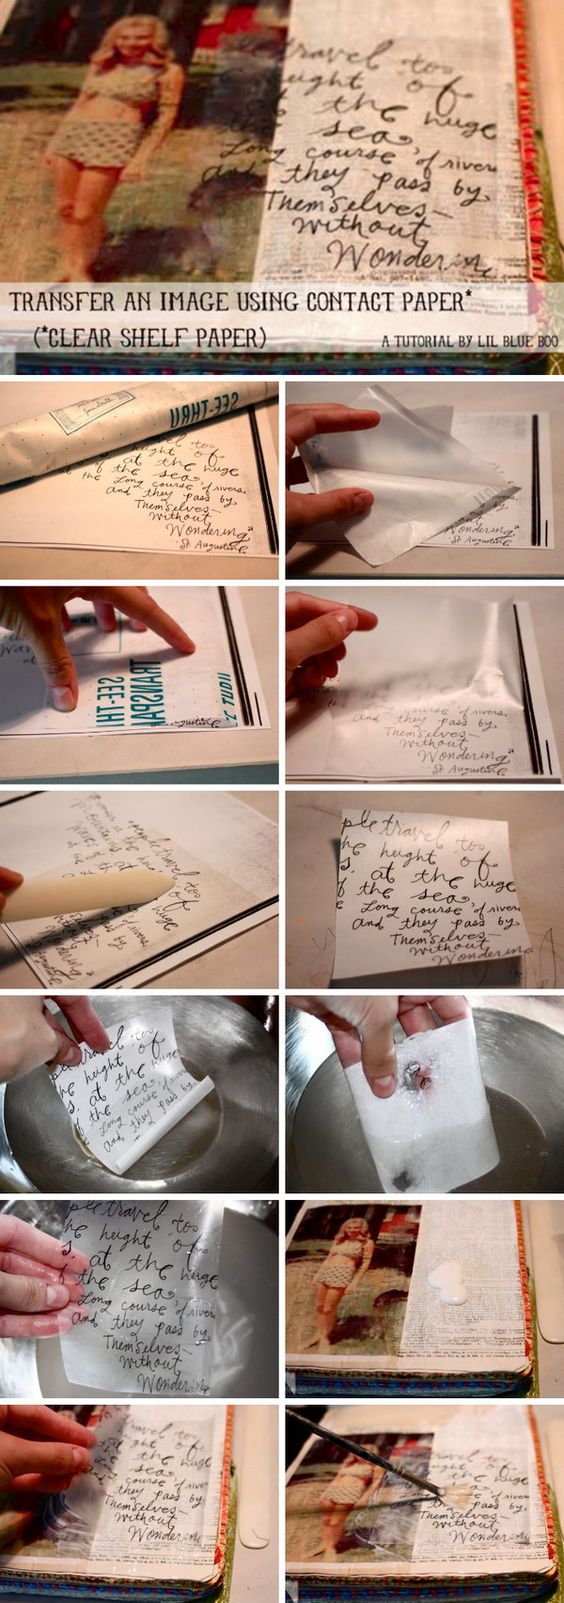 Transferring Images with Con-Tact Paper. 